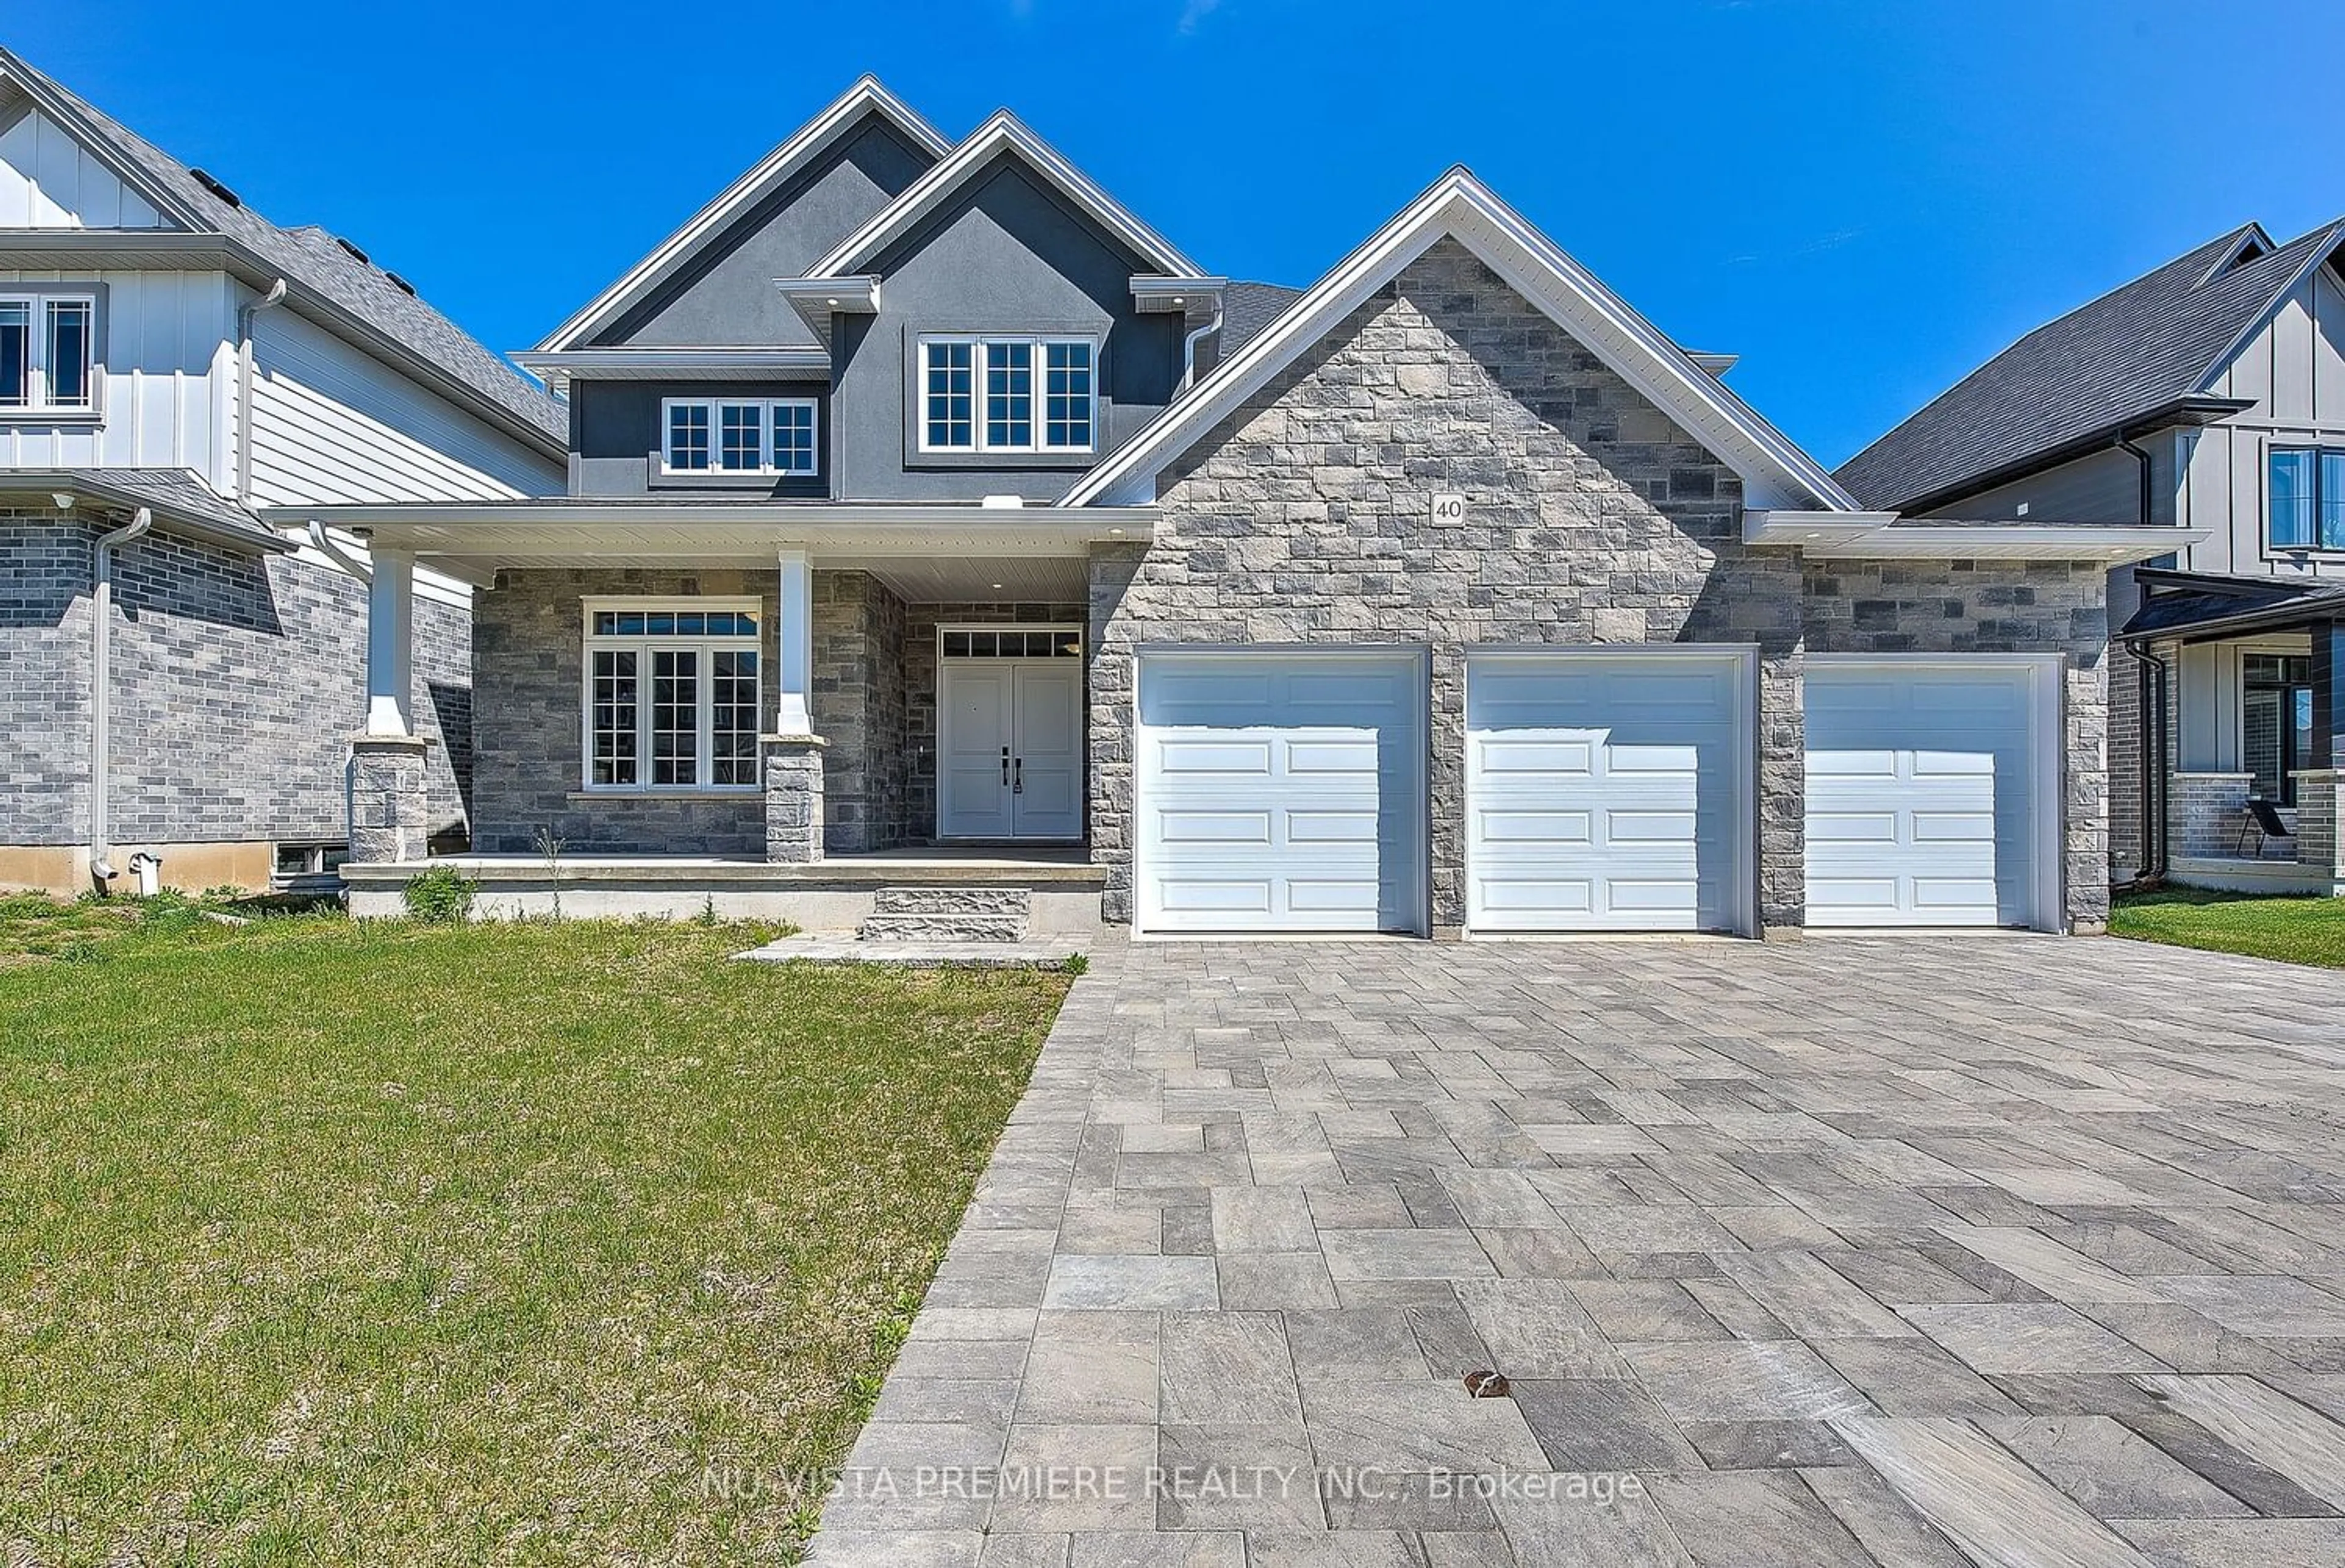 Home with brick exterior material for 40 Hazelwood Pass, Thames Centre Ontario N0L 1G3